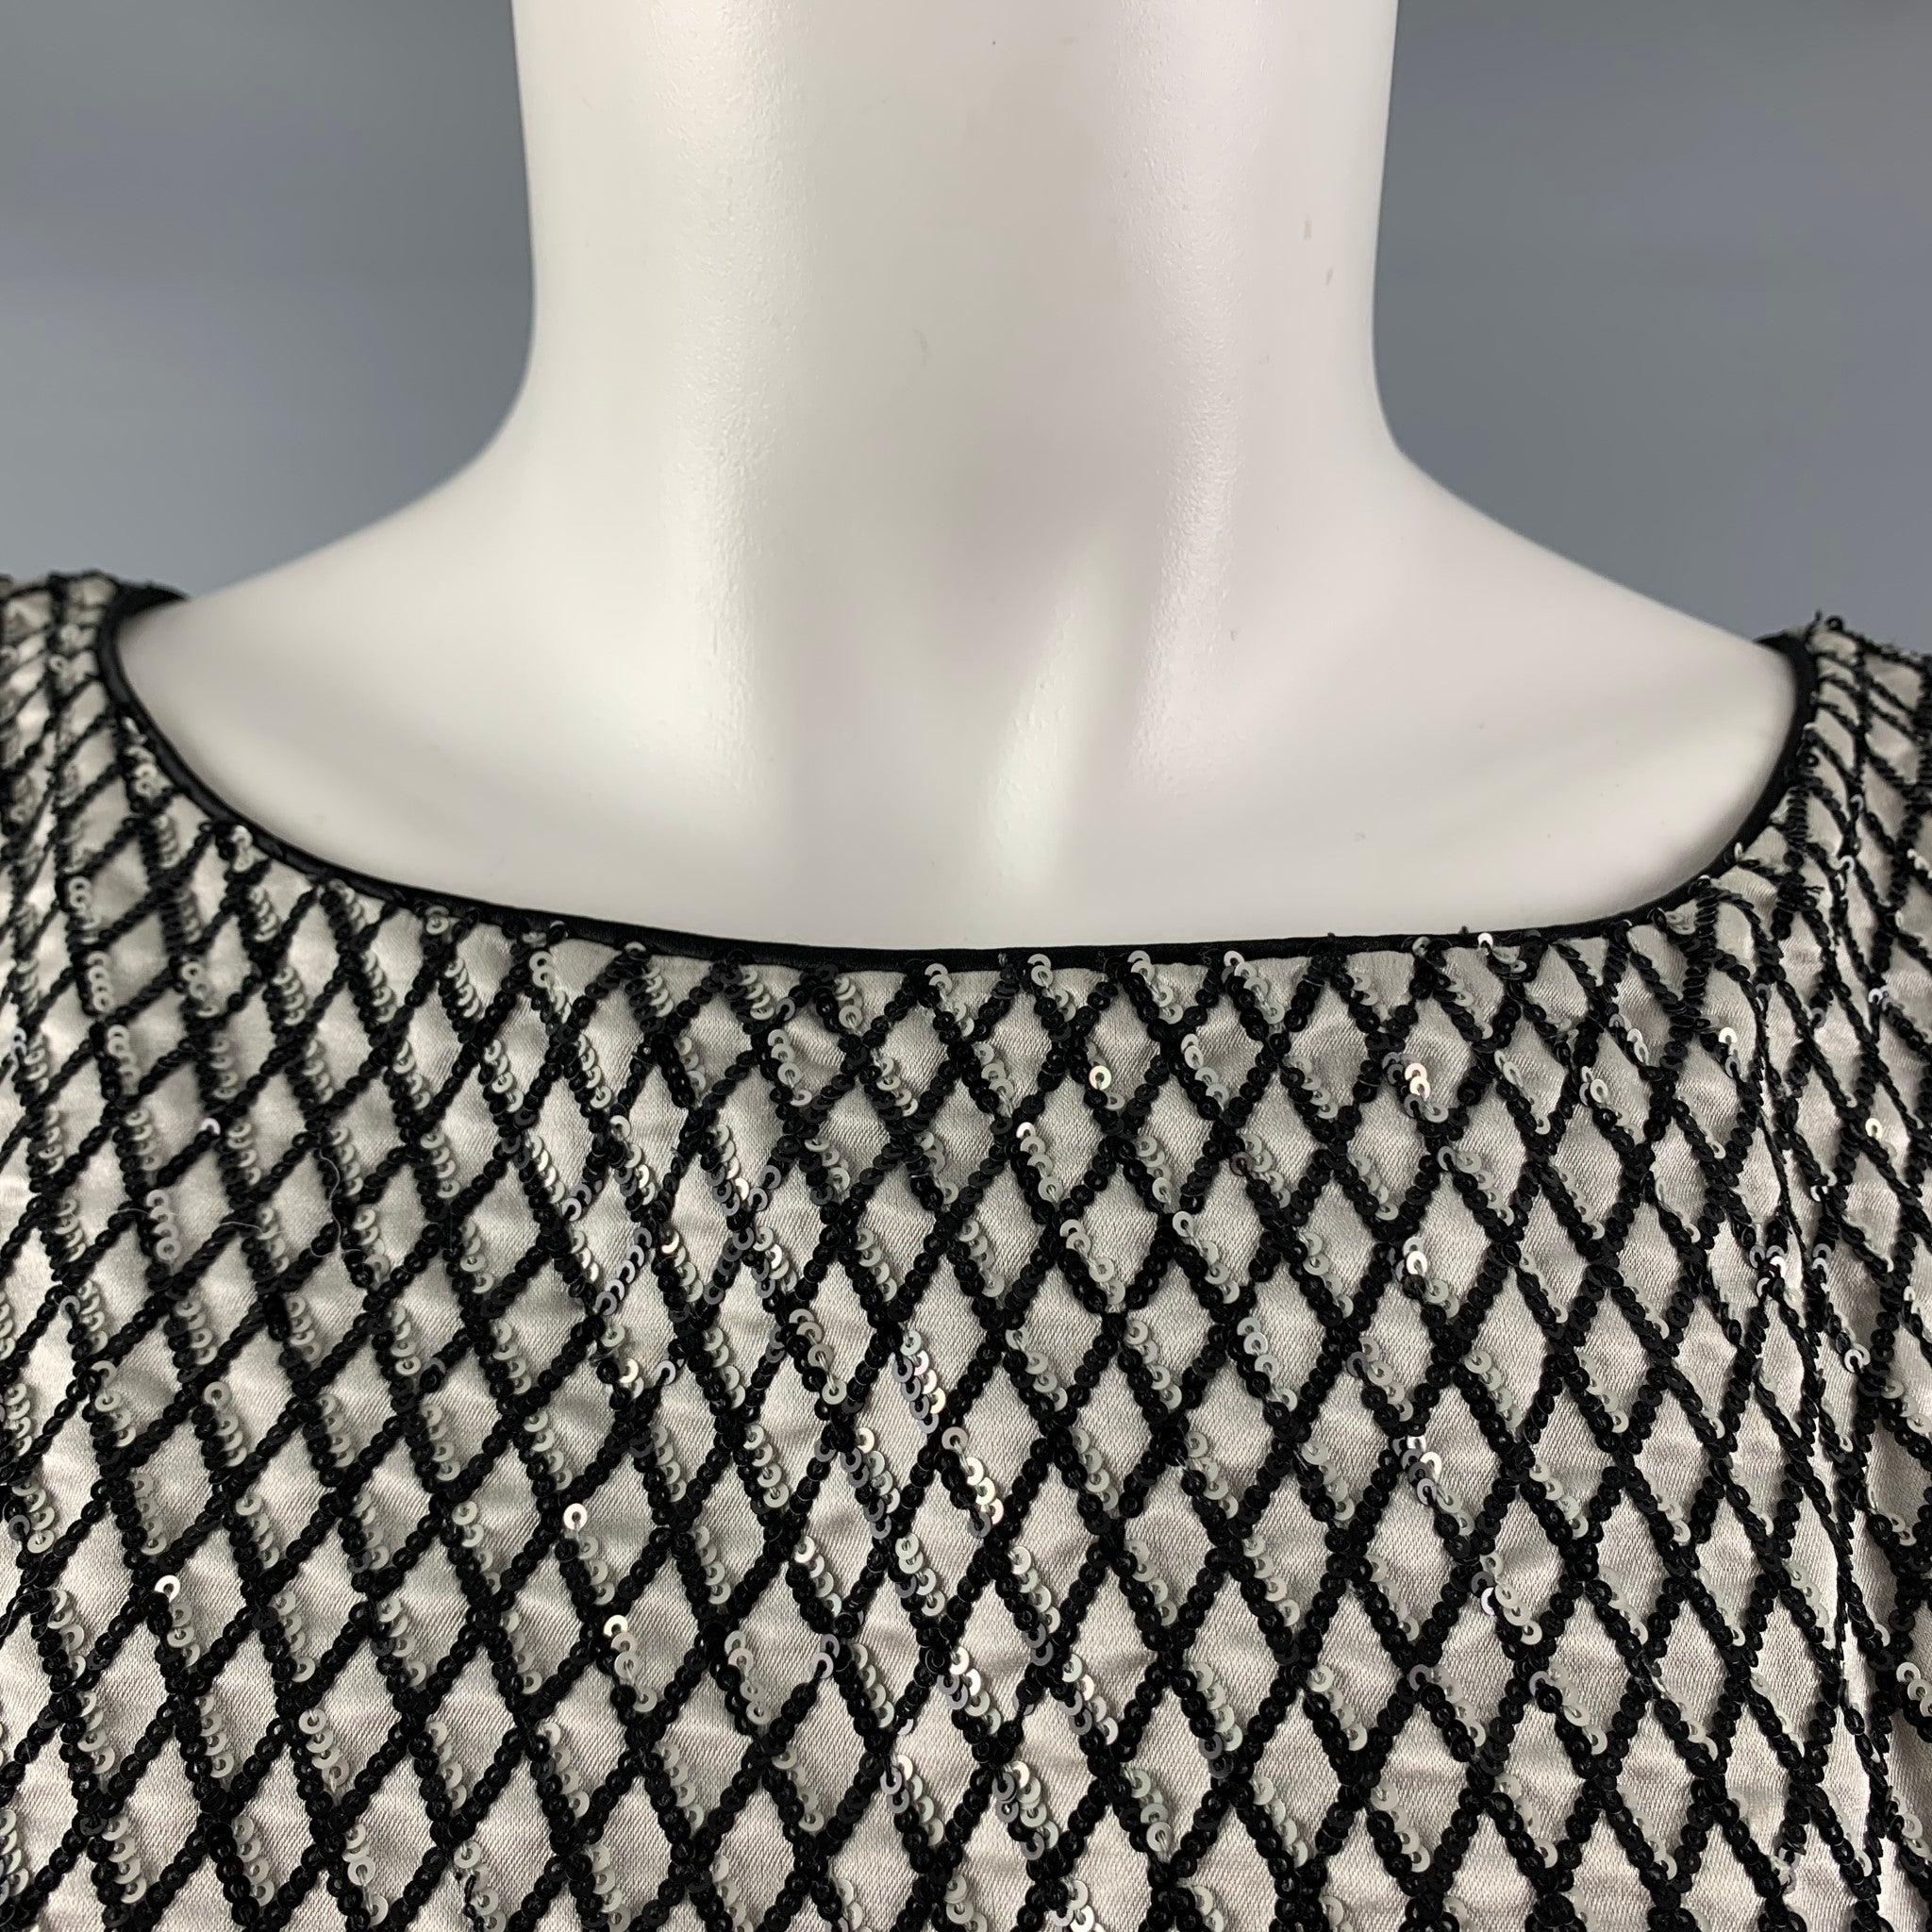 MARC JACOBS dress comes in a gray and black sequined silk featuring a shift style, sleeveless, and a back zip up closure. Made in USA. Excellent Pre-Owned Condition. 
 

 Marked:  0 
 

 Measurements: 
  
 Shoulder: 15 inches Bust: 32 inches Waist: